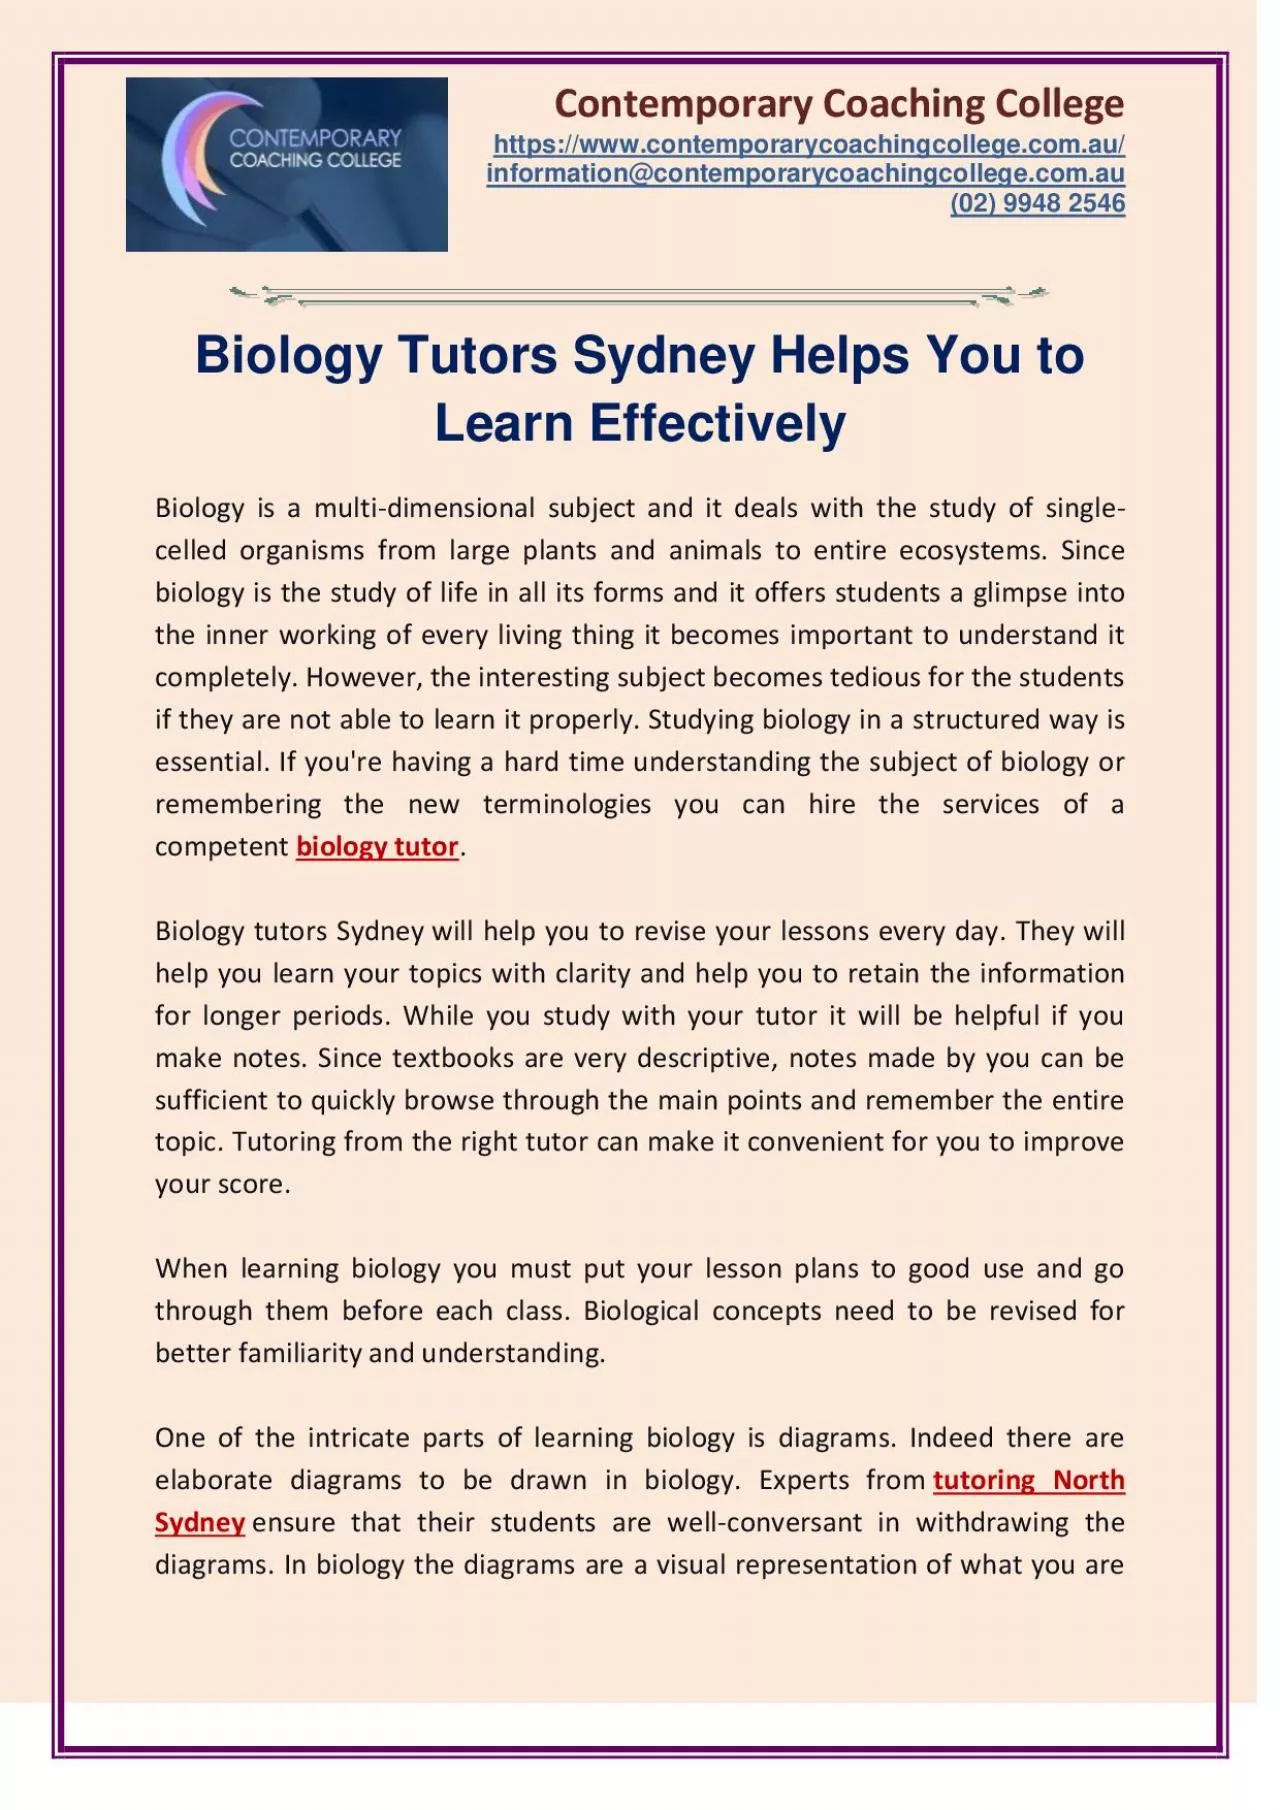 Biology Tutors Sydney Helps You to Learn Effectively